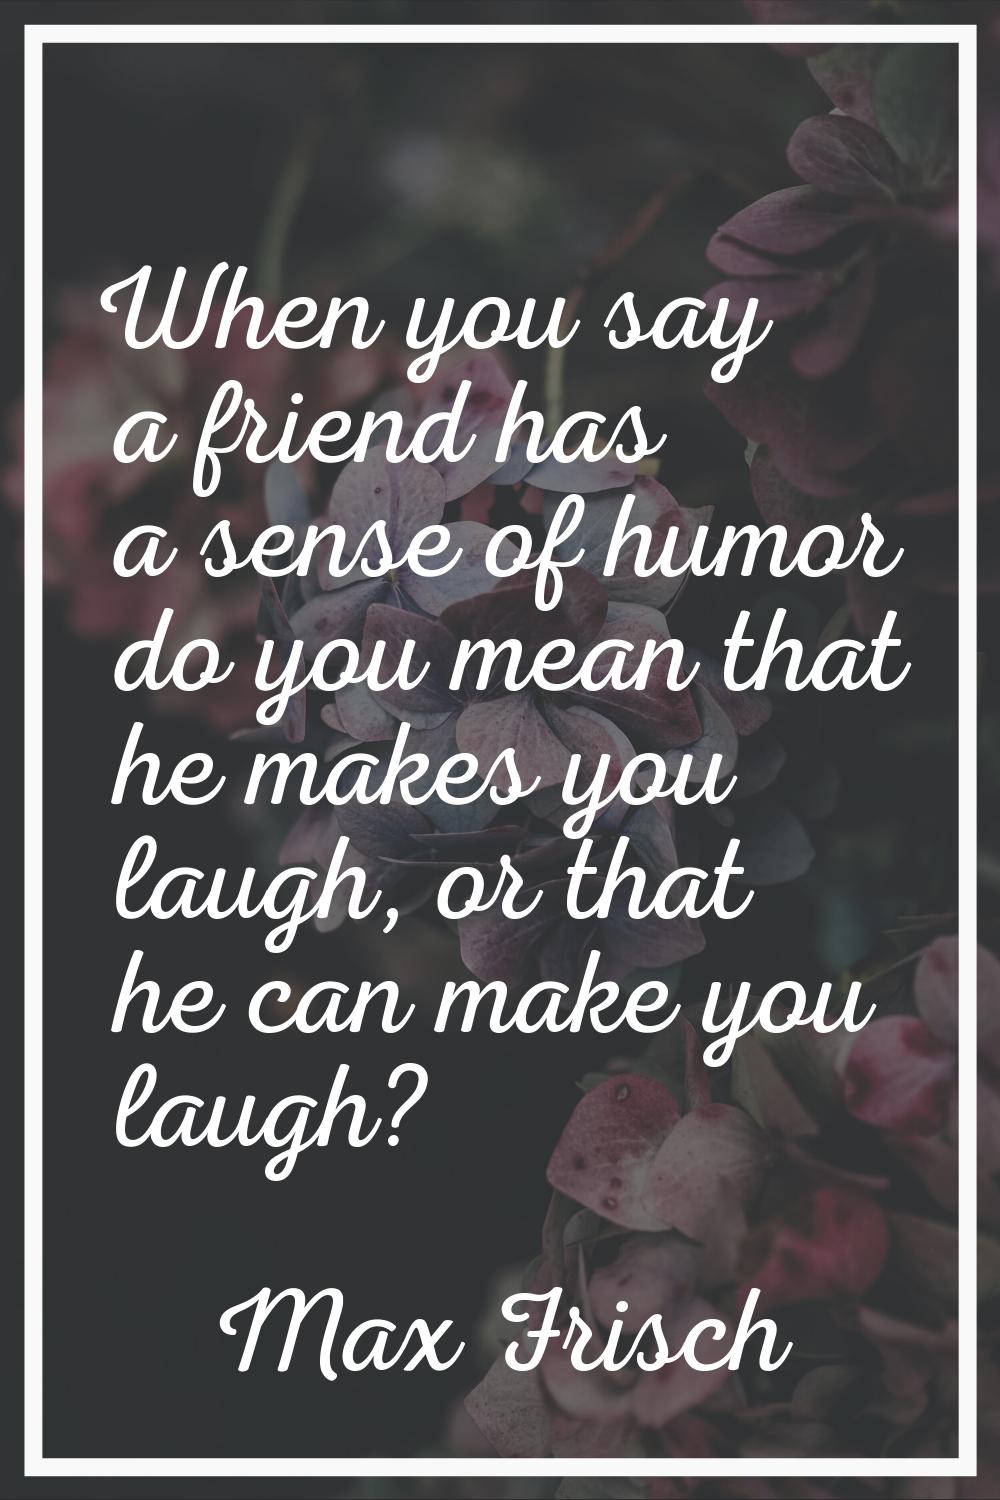 When you say a friend has a sense of humor do you mean that he makes you laugh, or that he can make